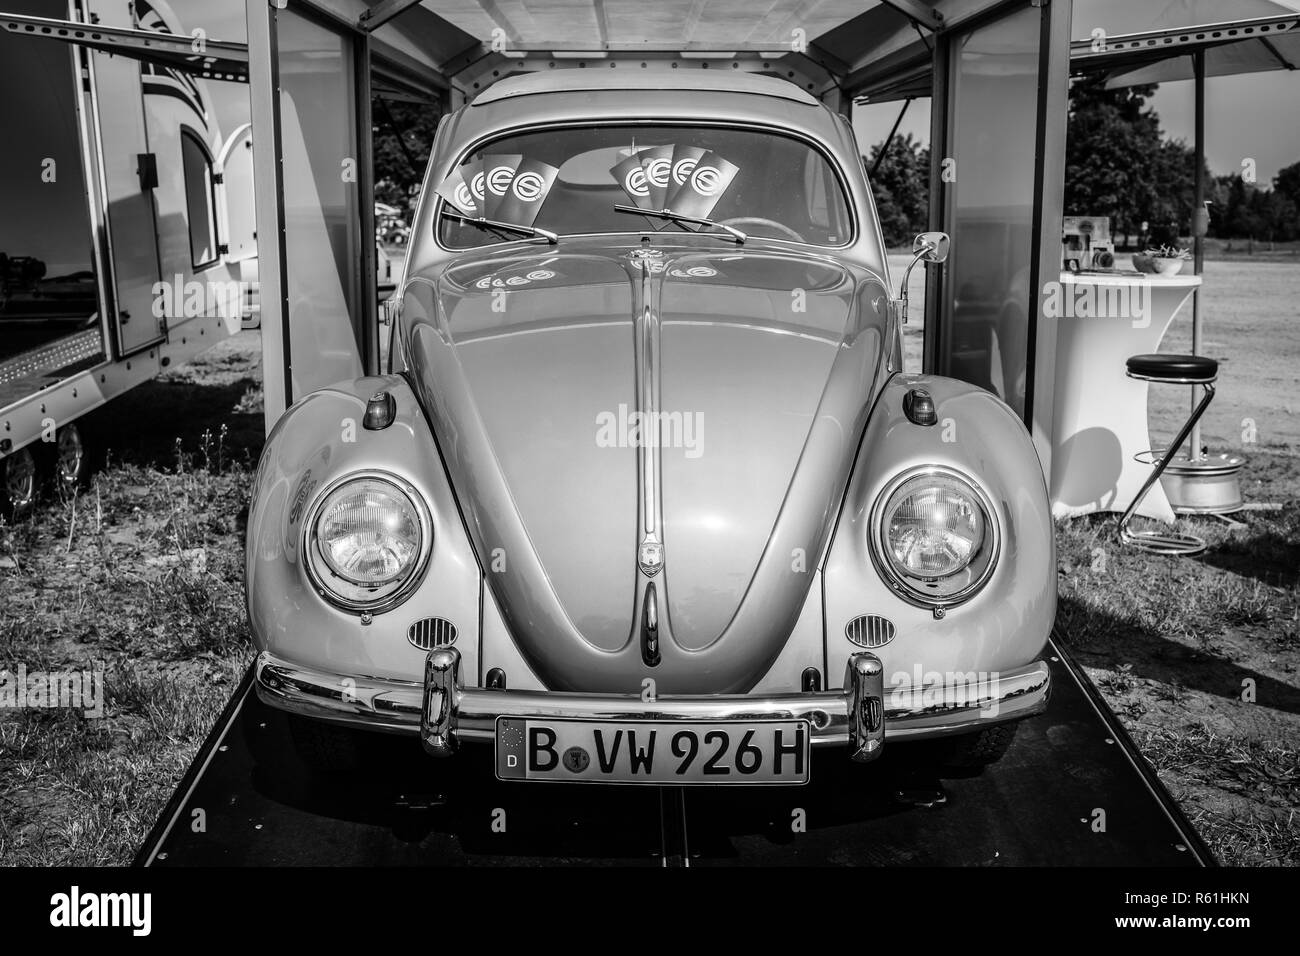 PAAREN IM GLIEN, GERMANY - MAY 19, 2018: Economy car Volkswagen Beetle. Black and white. Die Oldtimer Show 2018. Stock Photo